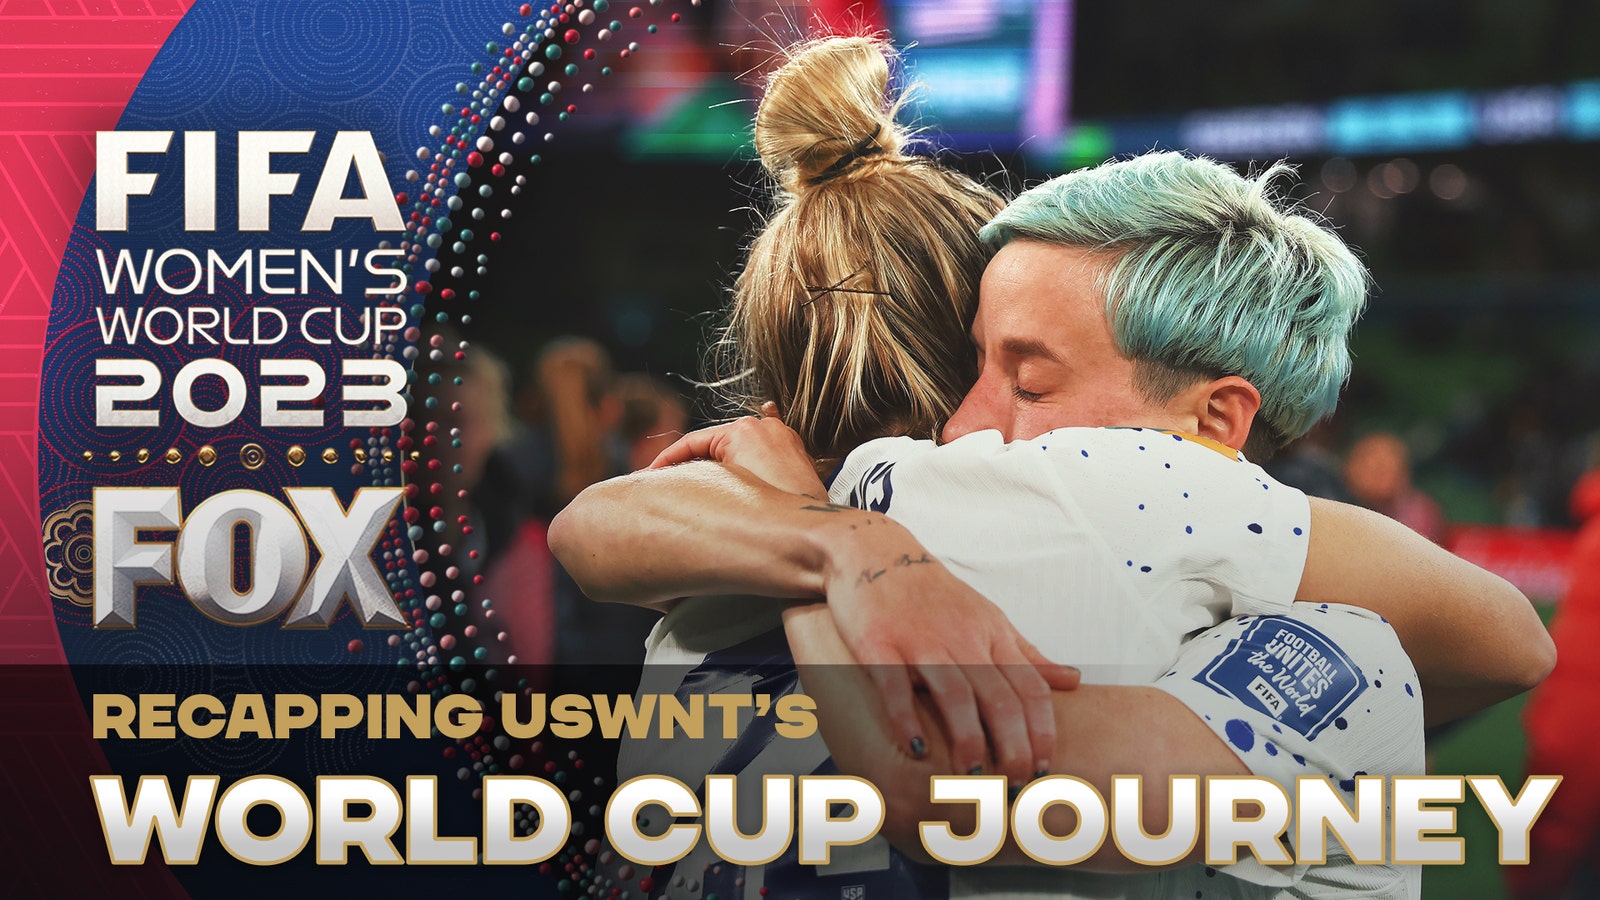 Recapping the USWNT's World Cup journey and its match against Sweden